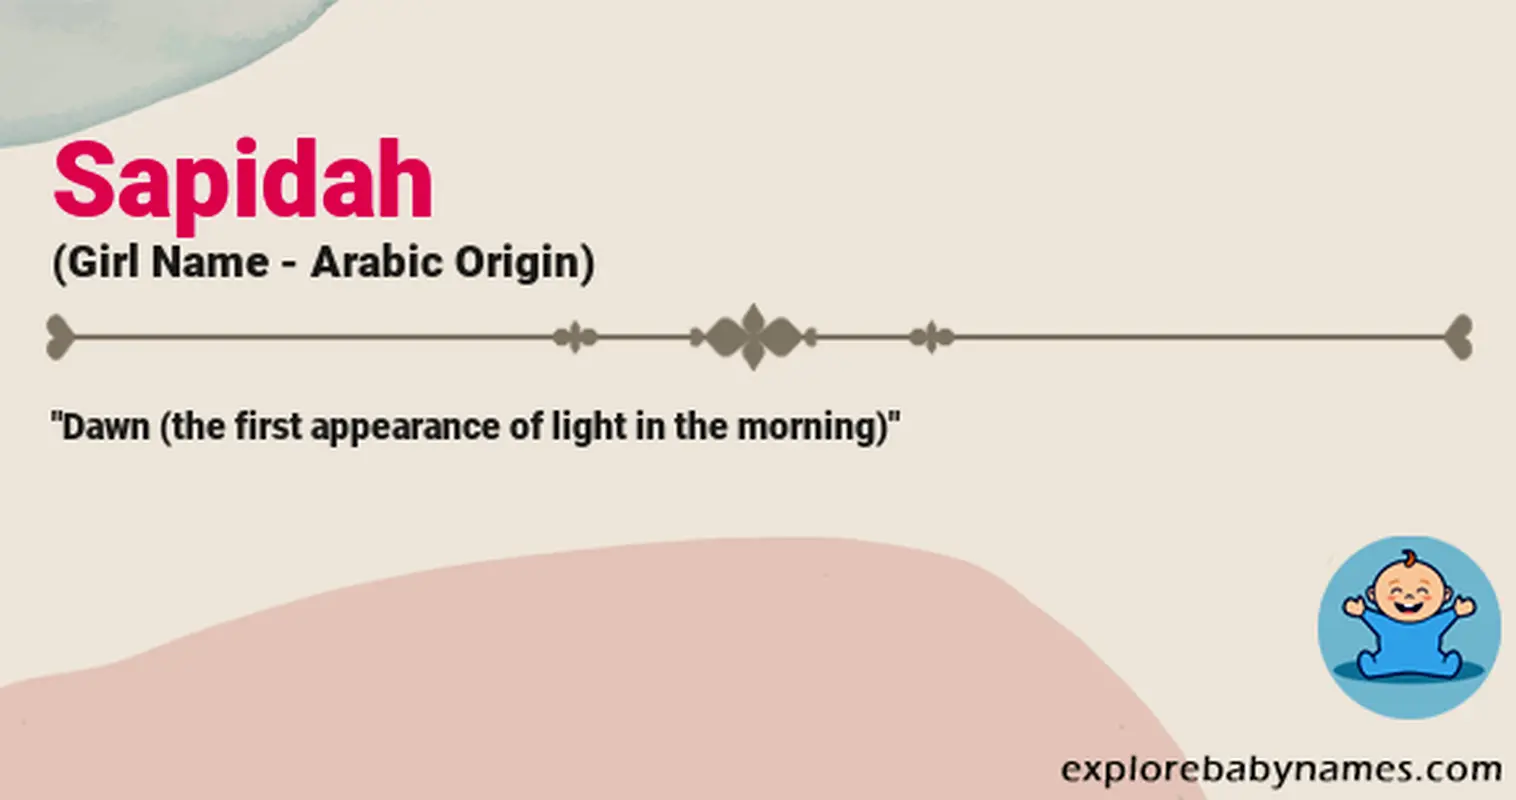 Meaning of Sapidah